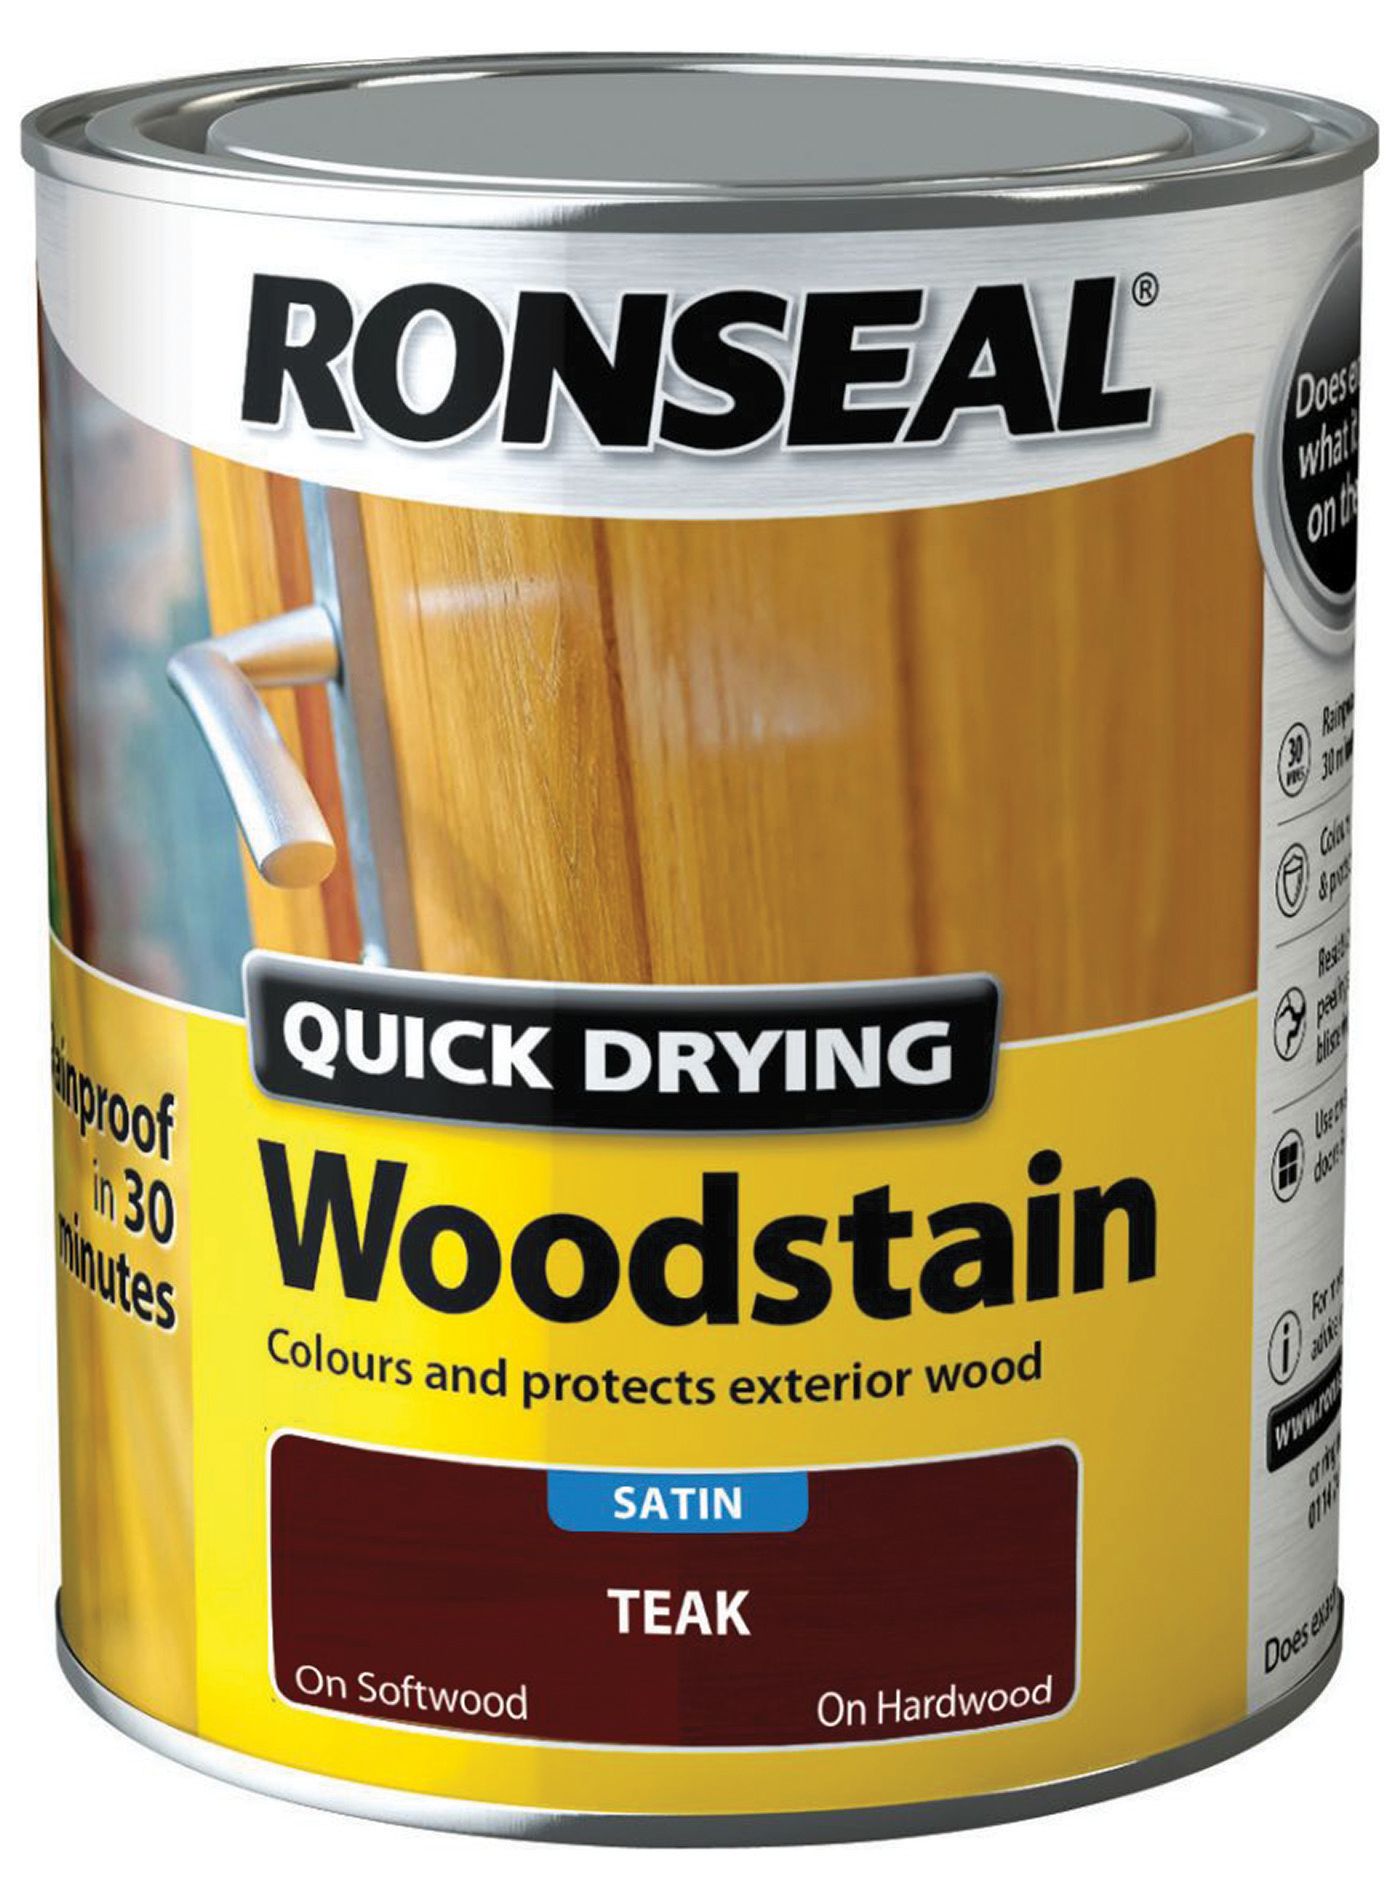 Ronseal Quick Drying Satin Woodstain - Satin - 750ml